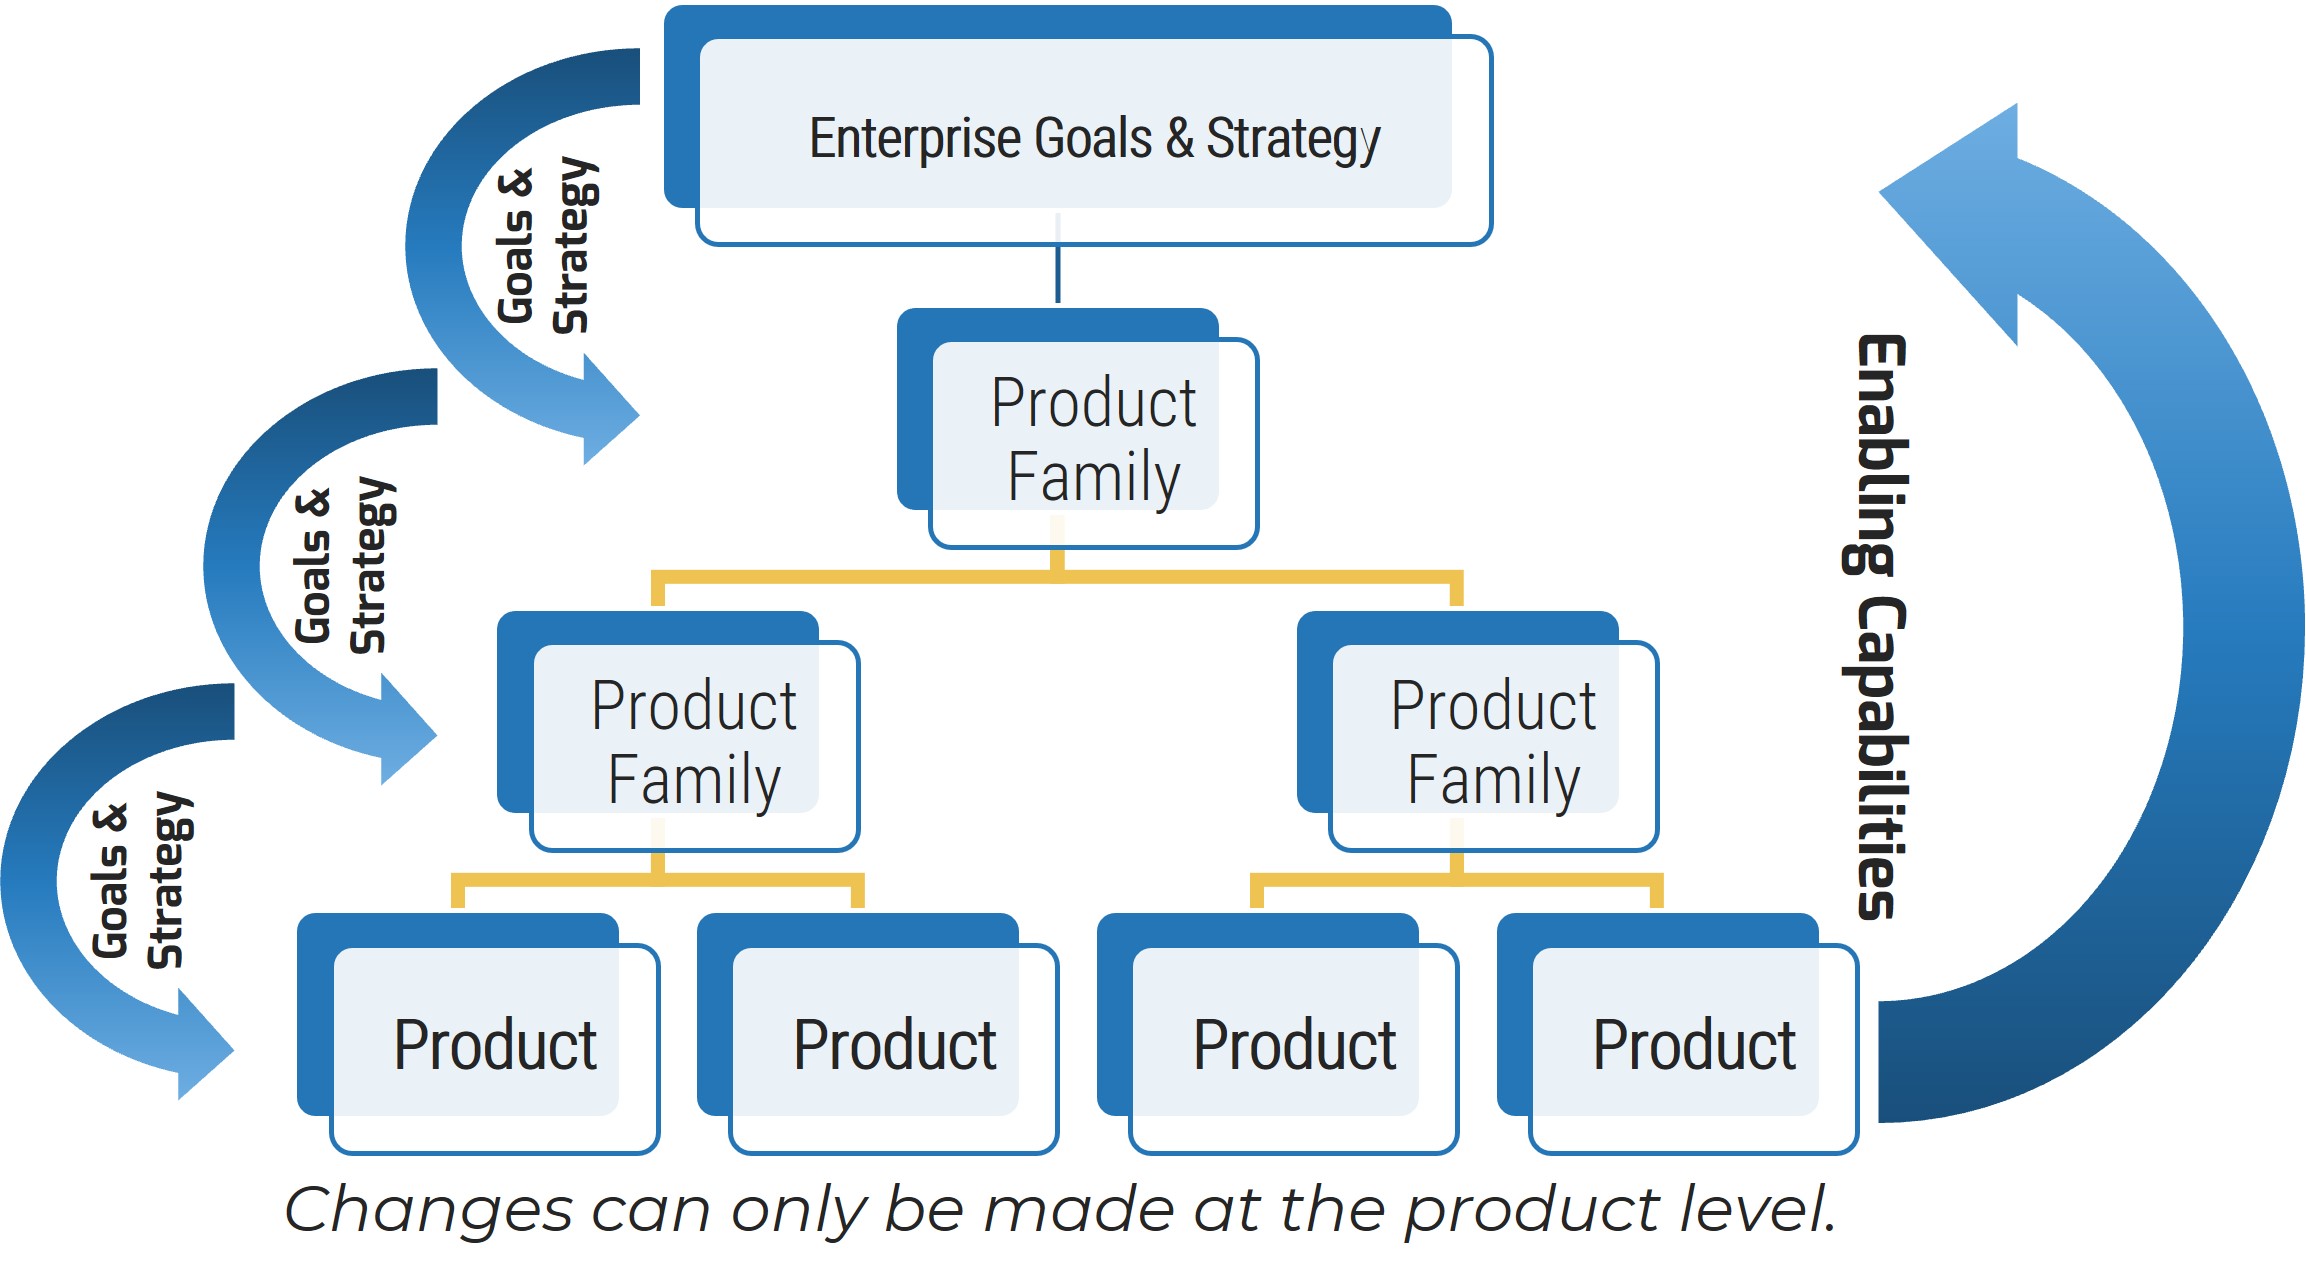 A flowchart is shown on how to operationally align product delivery to enterprise goals.